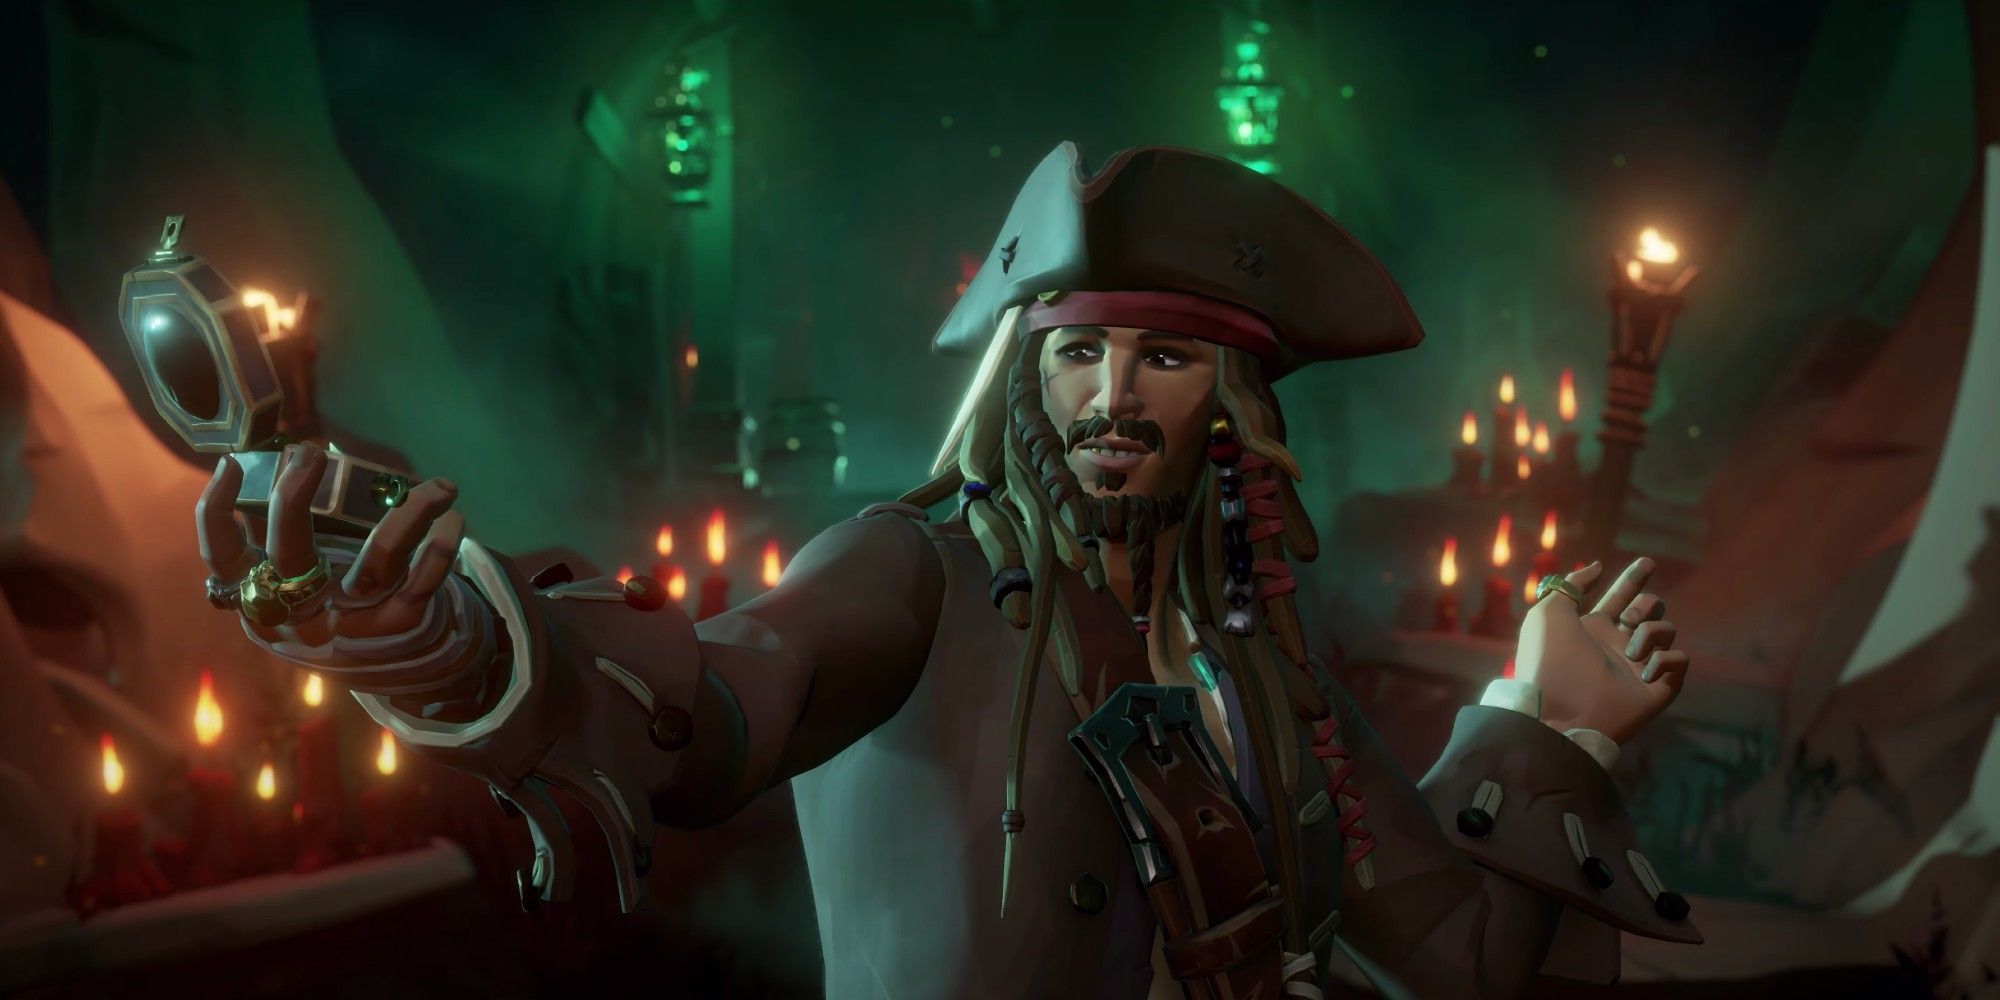 Sea of Thieves Season 3 – A Pirate’s Life Review: A Fitting Crossover